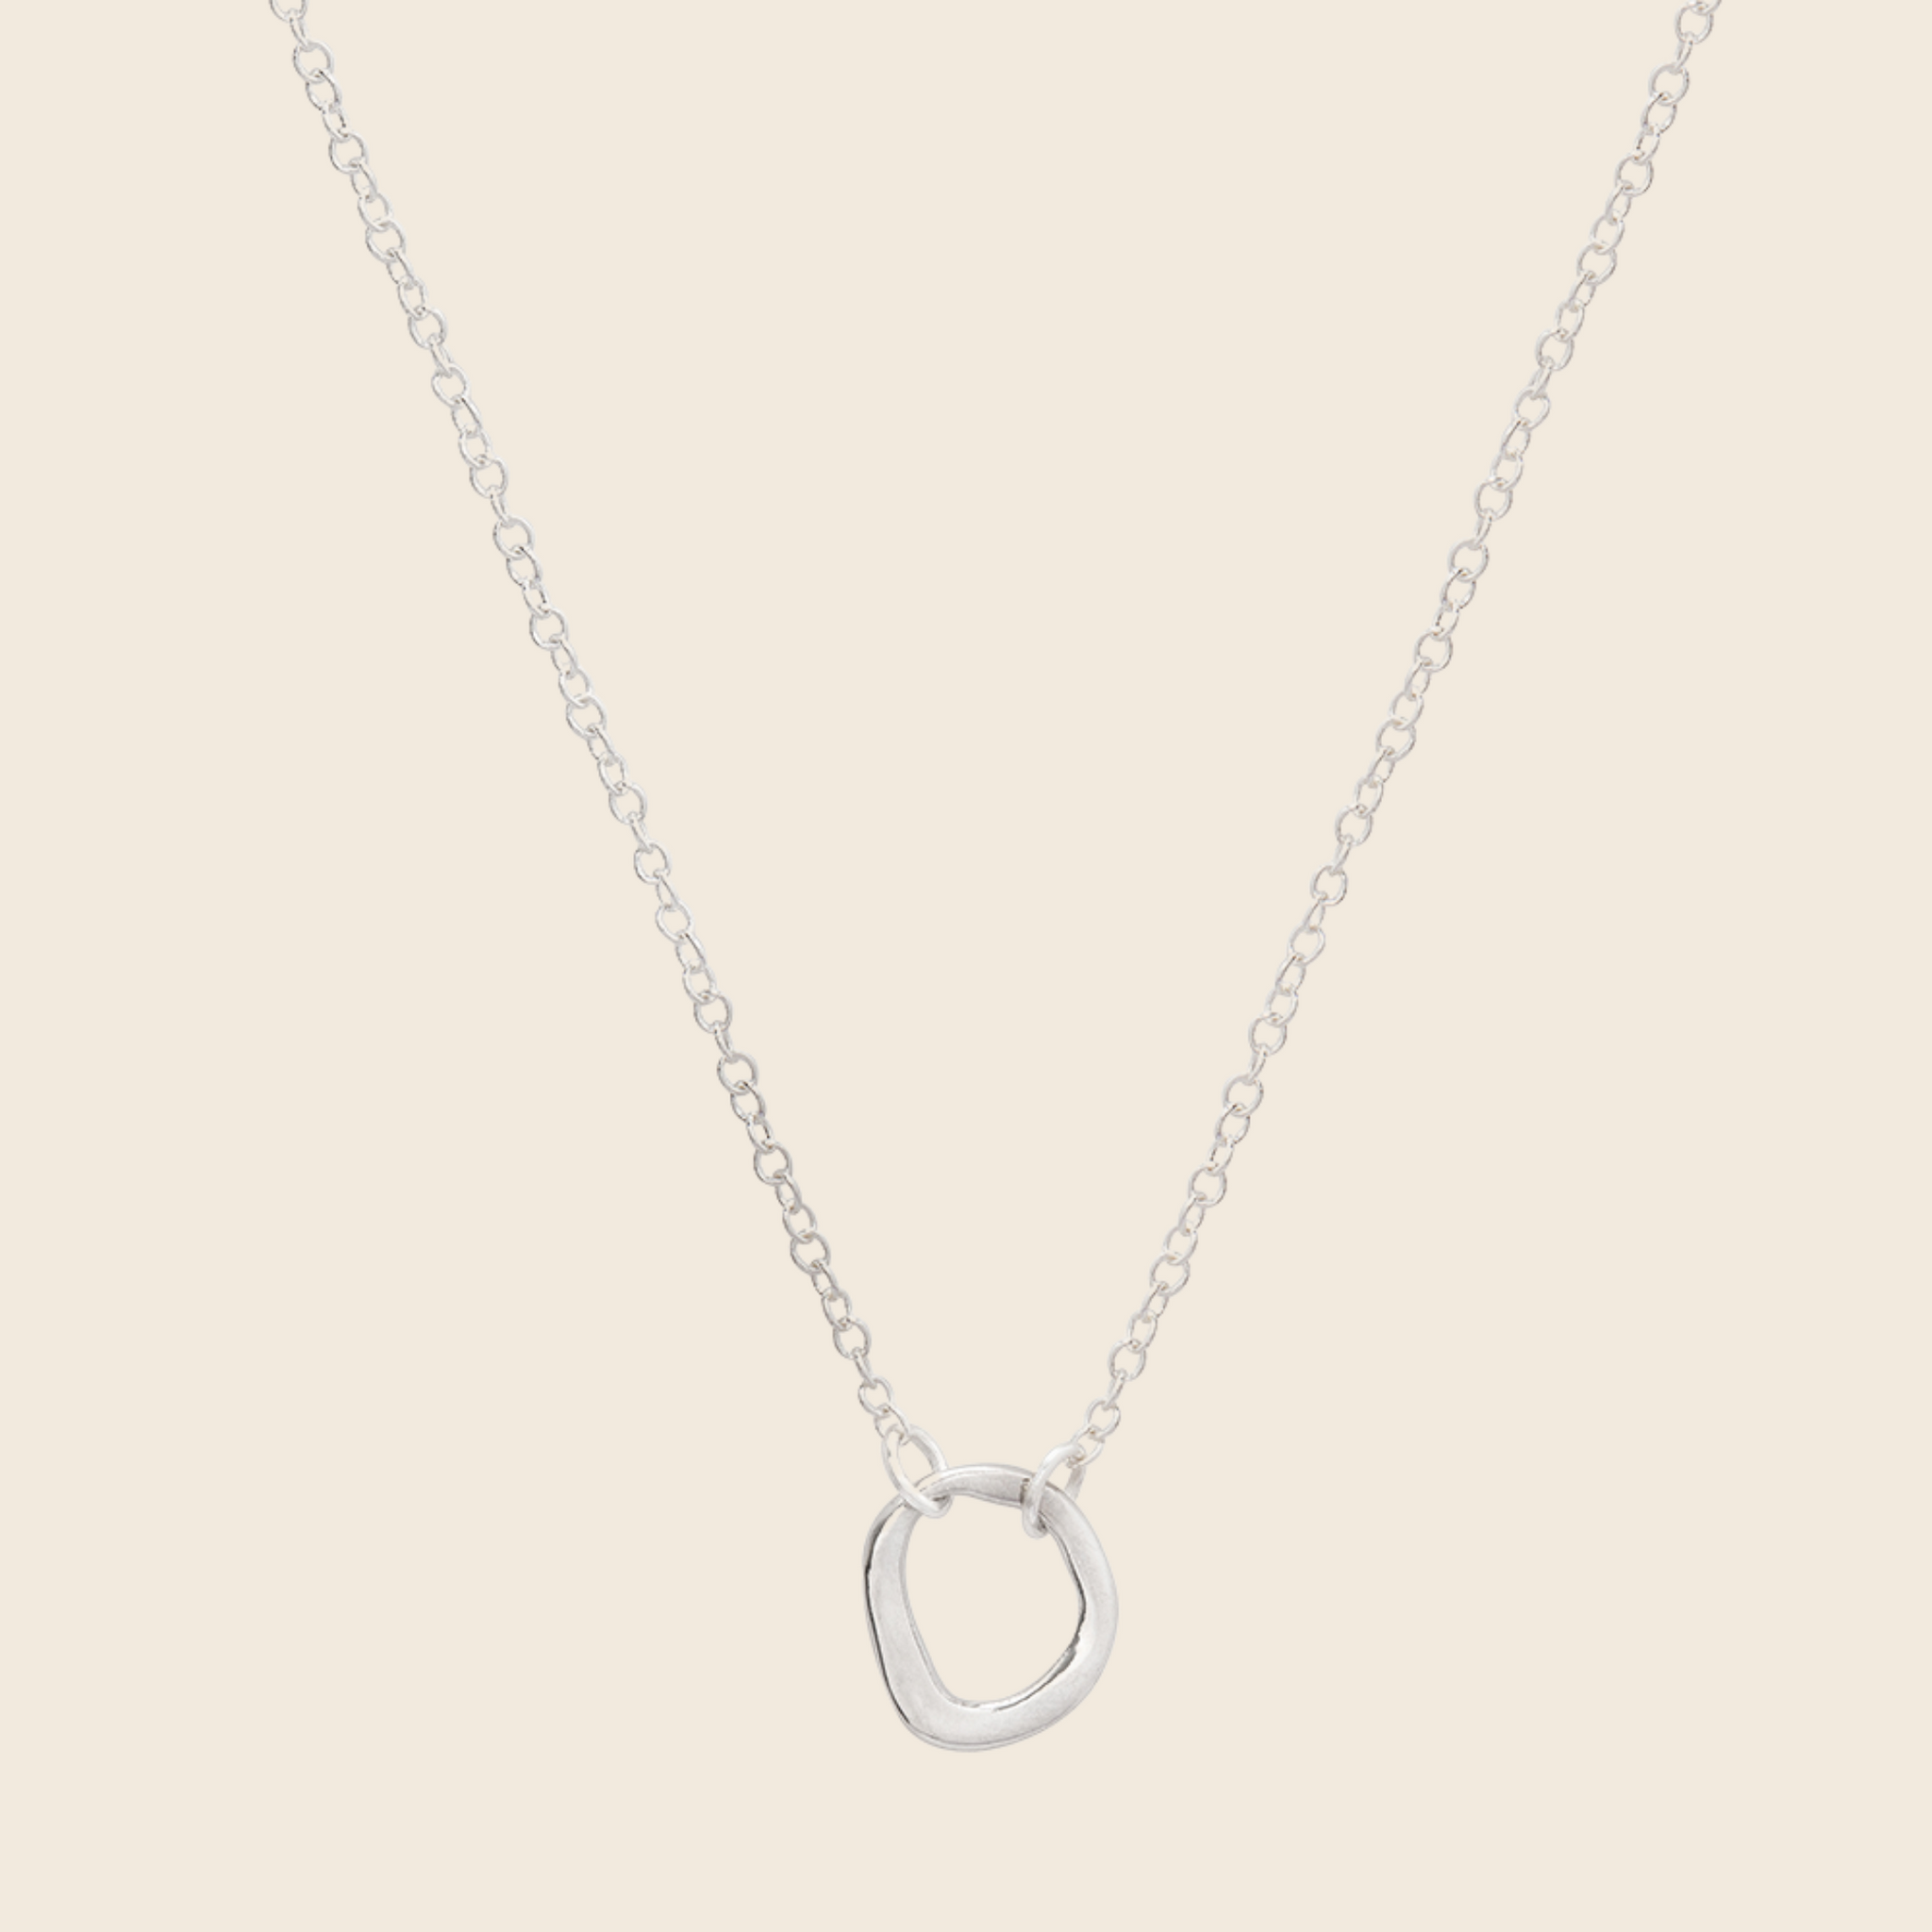 A Weathered Penny Sculptured Circle Necklace Silver